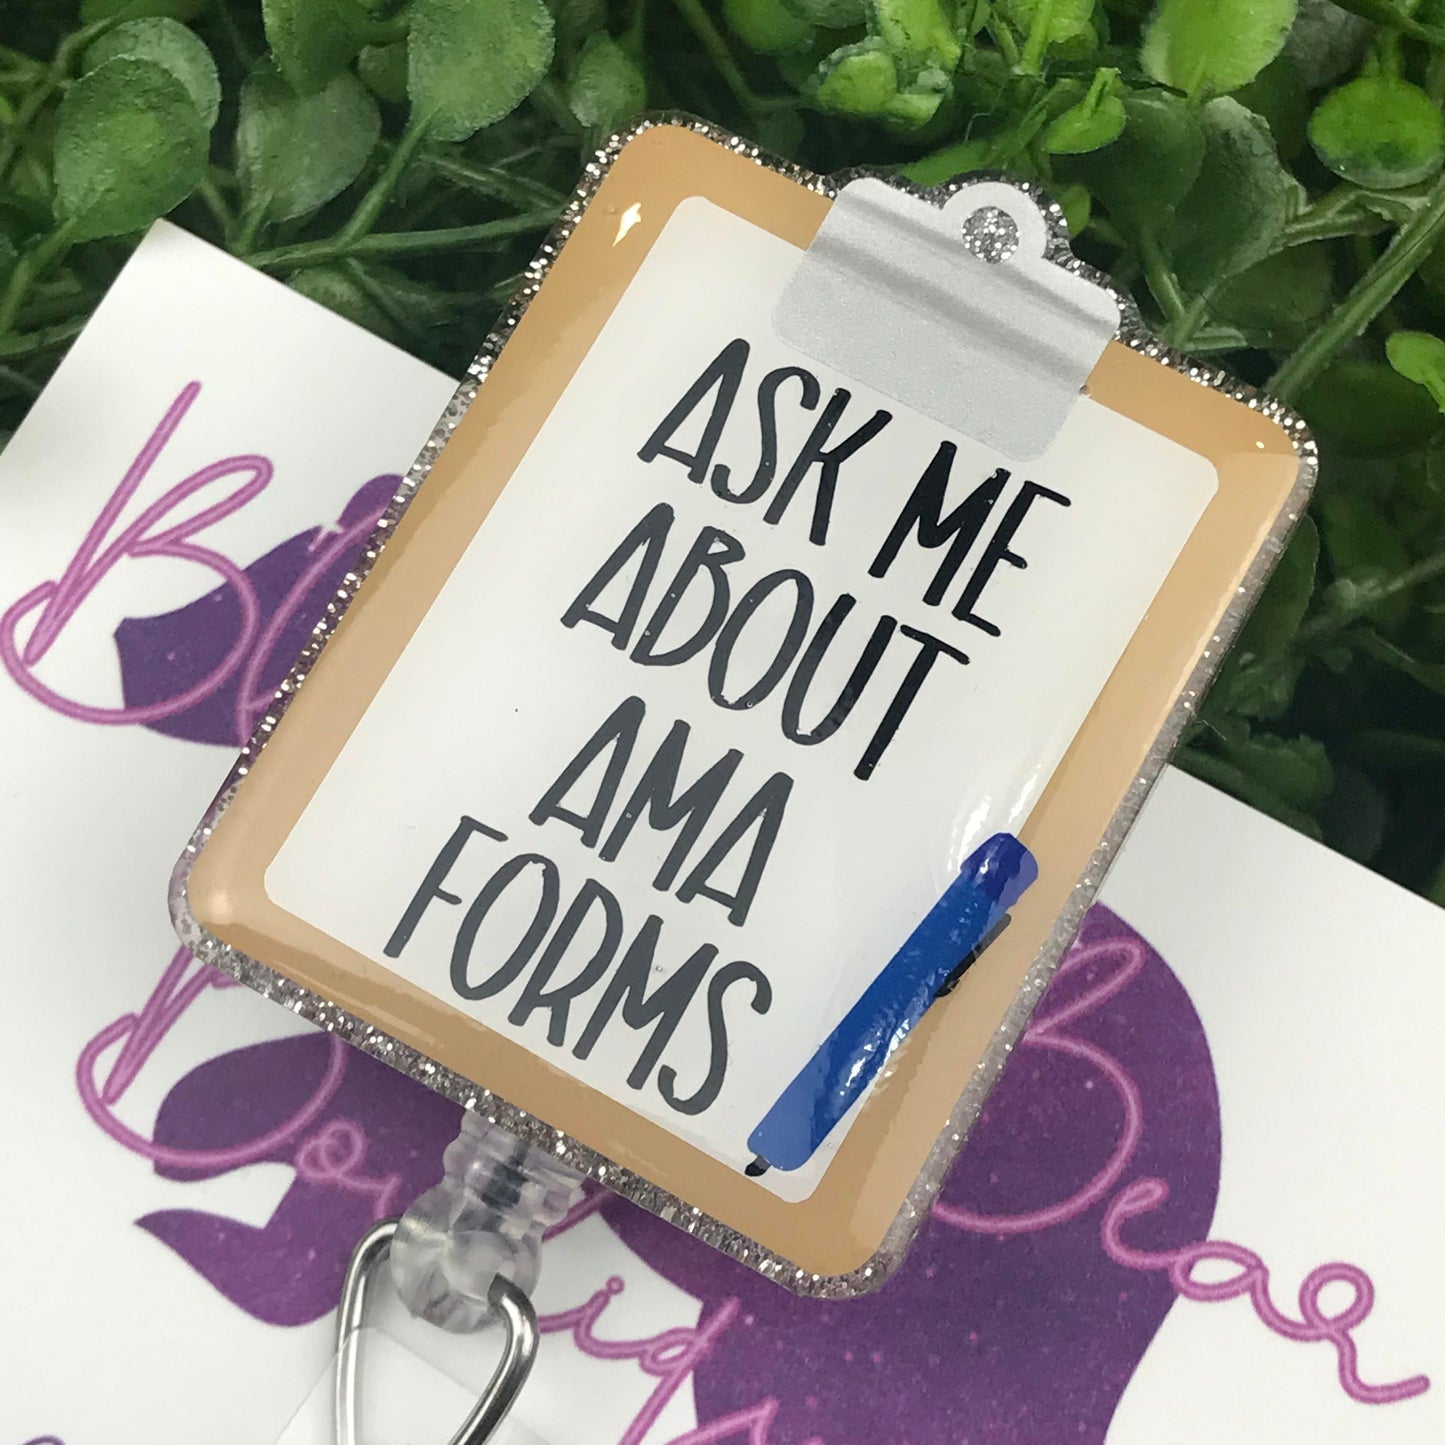 Ask Me About AMA Forms Badge Reel